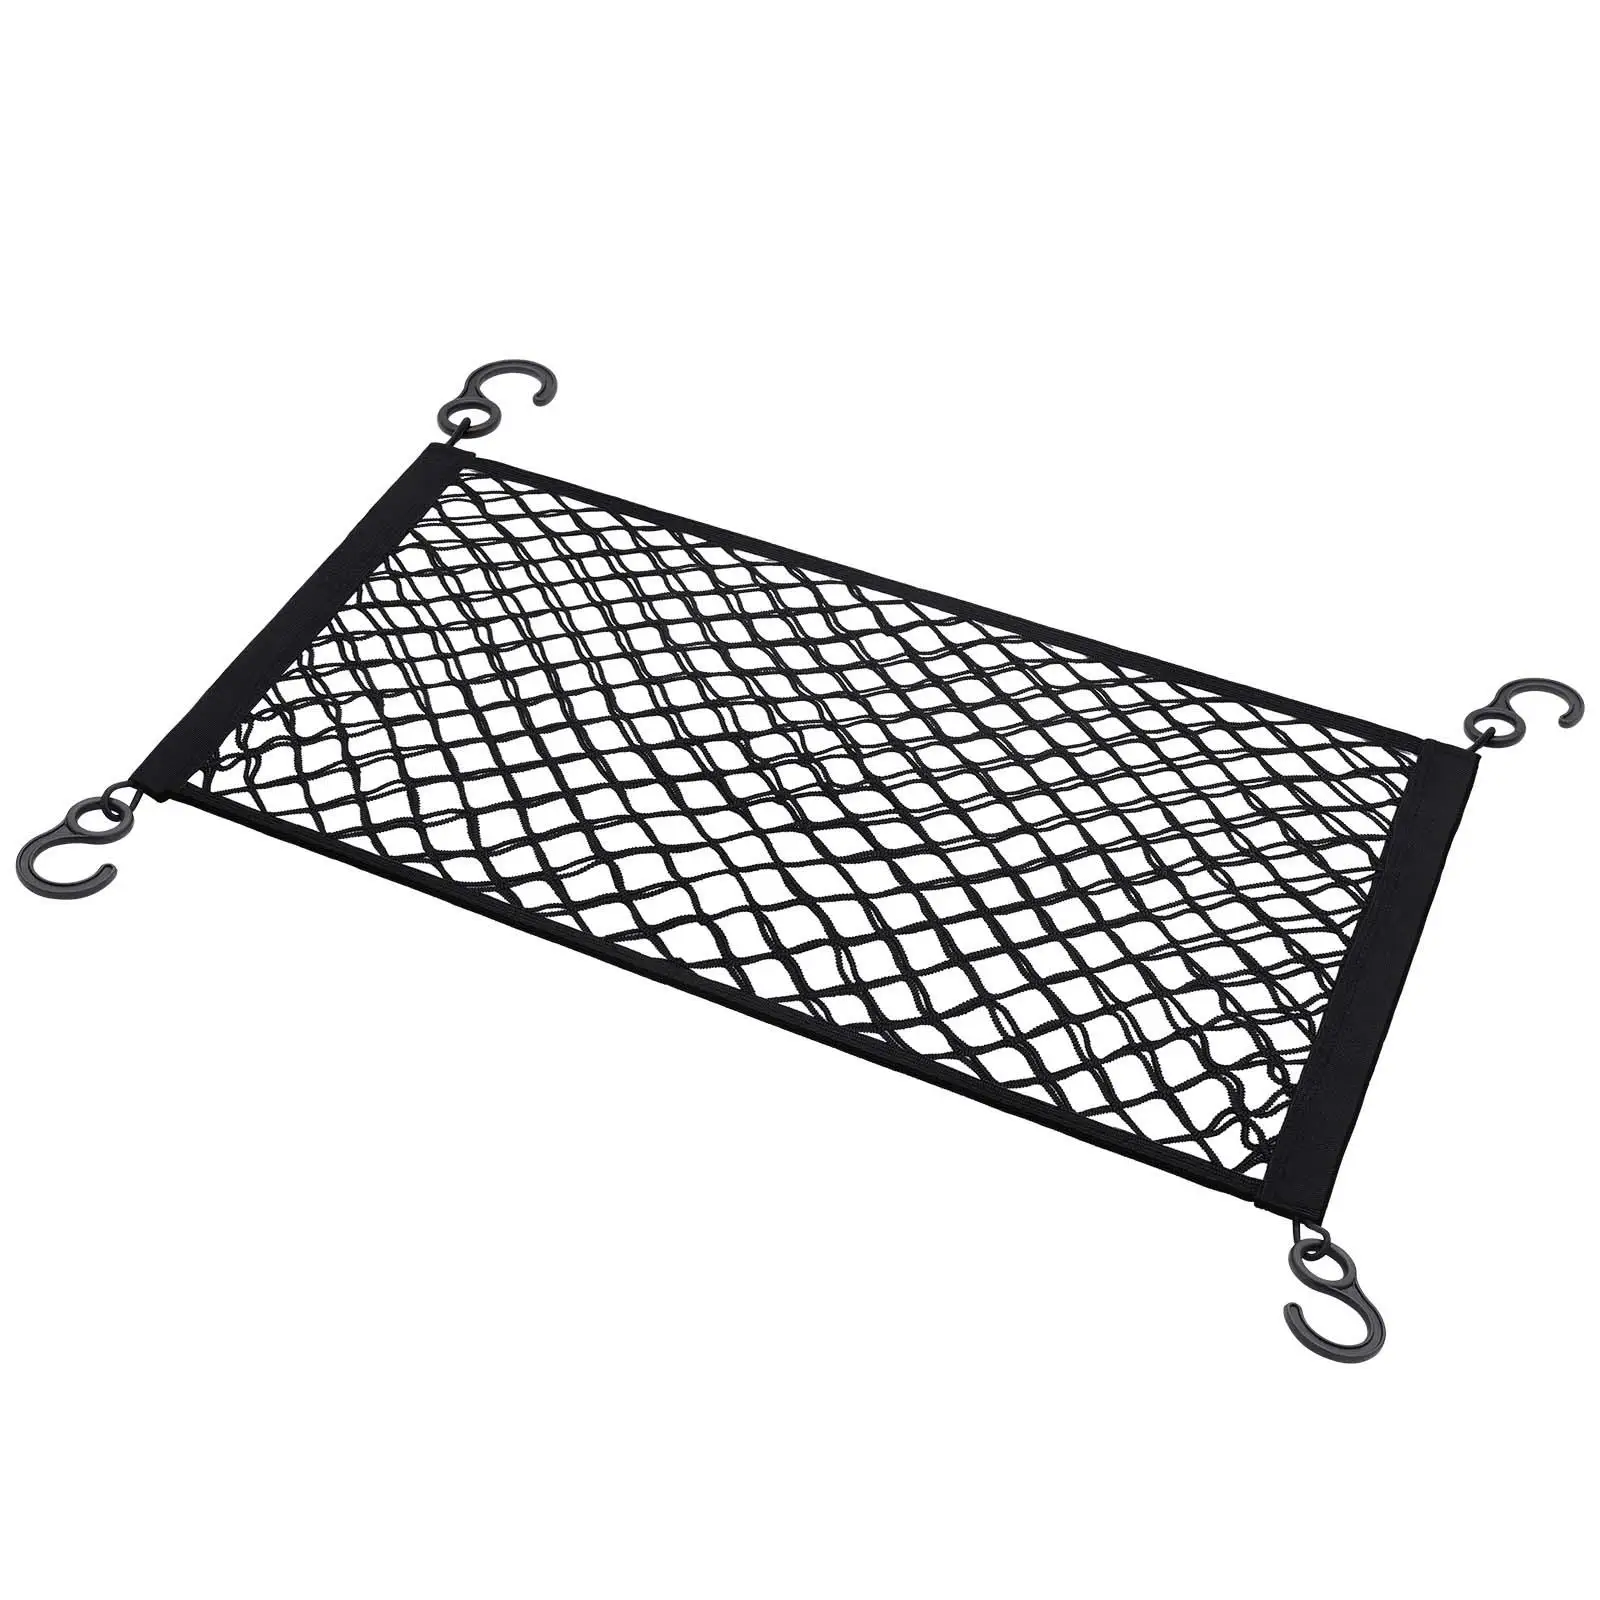 Cart Cargo Storage Net Bag Stretchable Pouch Bag for SUV Truck Car Truck